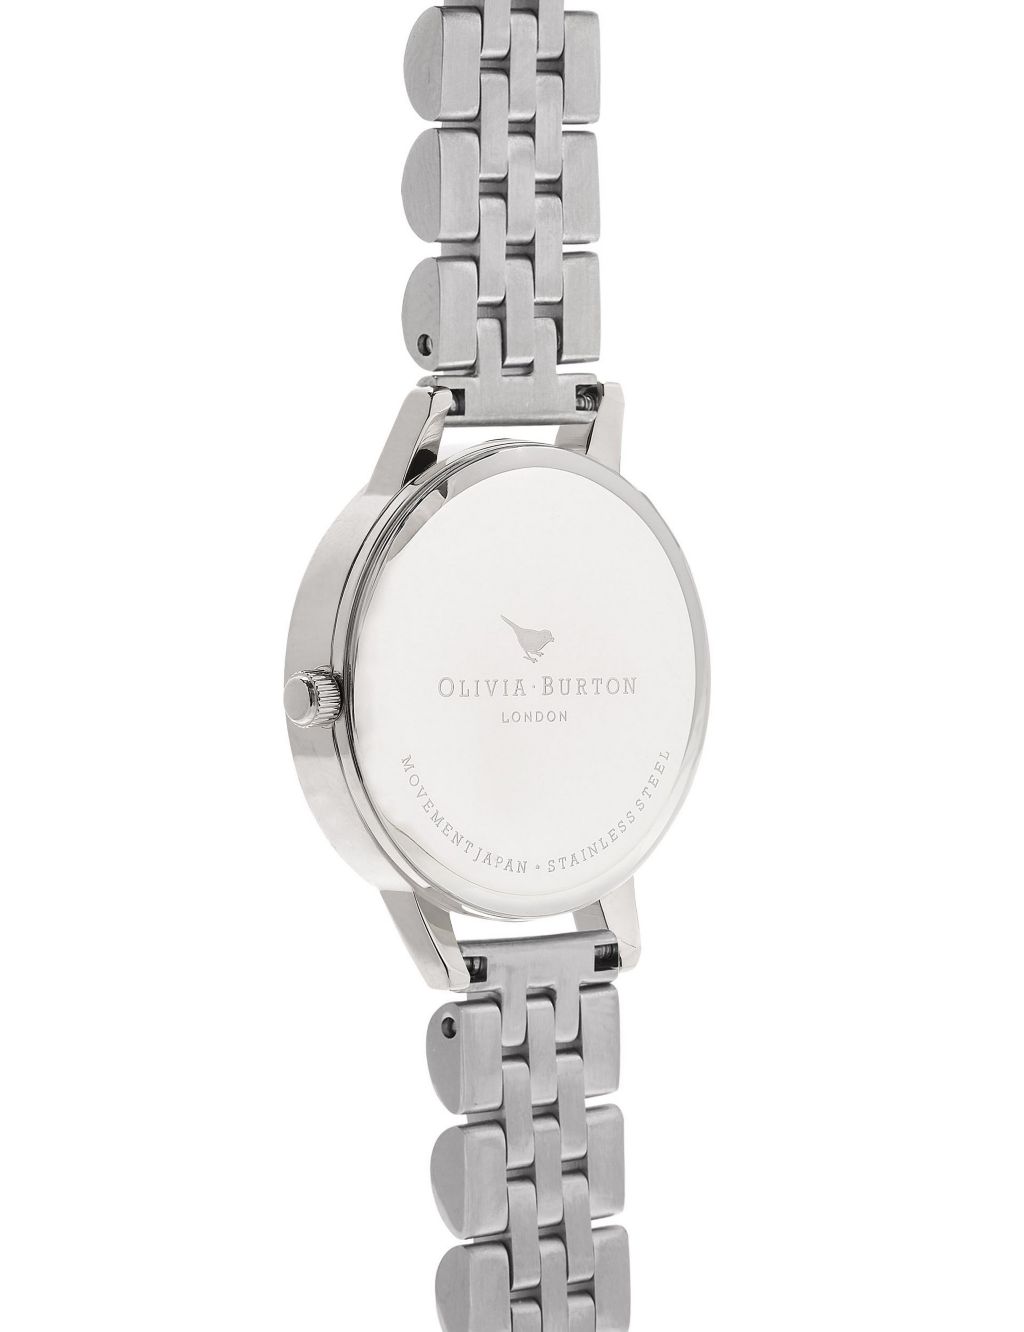 Olivia Burton Mother Of Pearl Silver Watch image 4